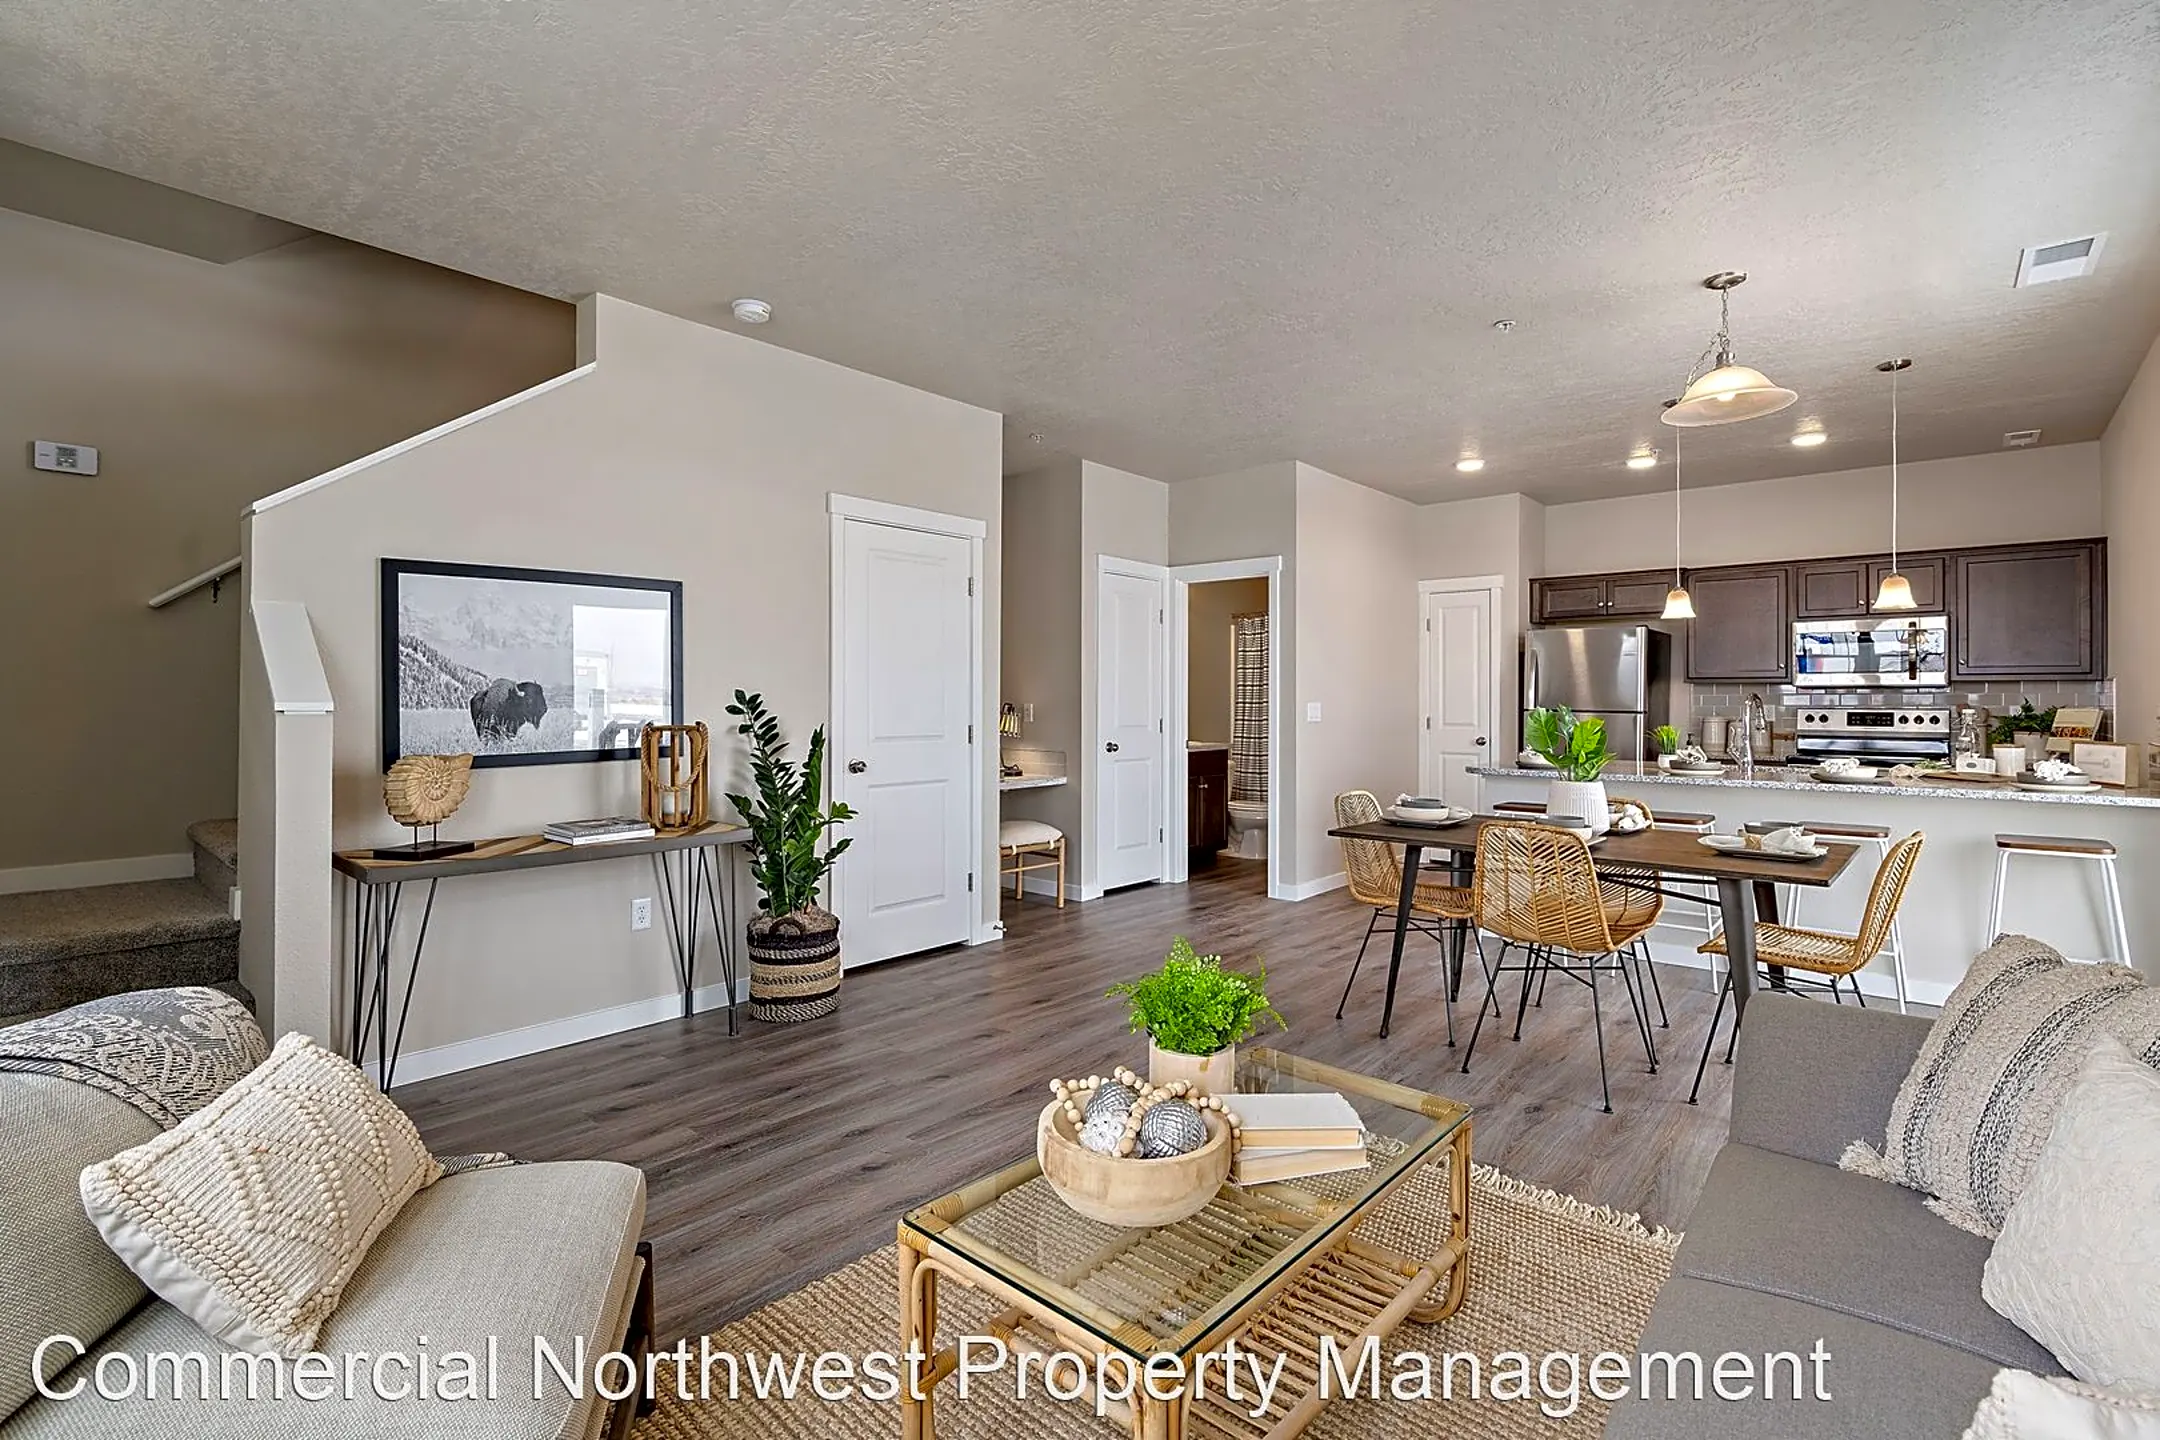 Dining Room - Sunnyvale Village ! 1 Month Free for All Move-ins before 3/15! - Nampa, ID